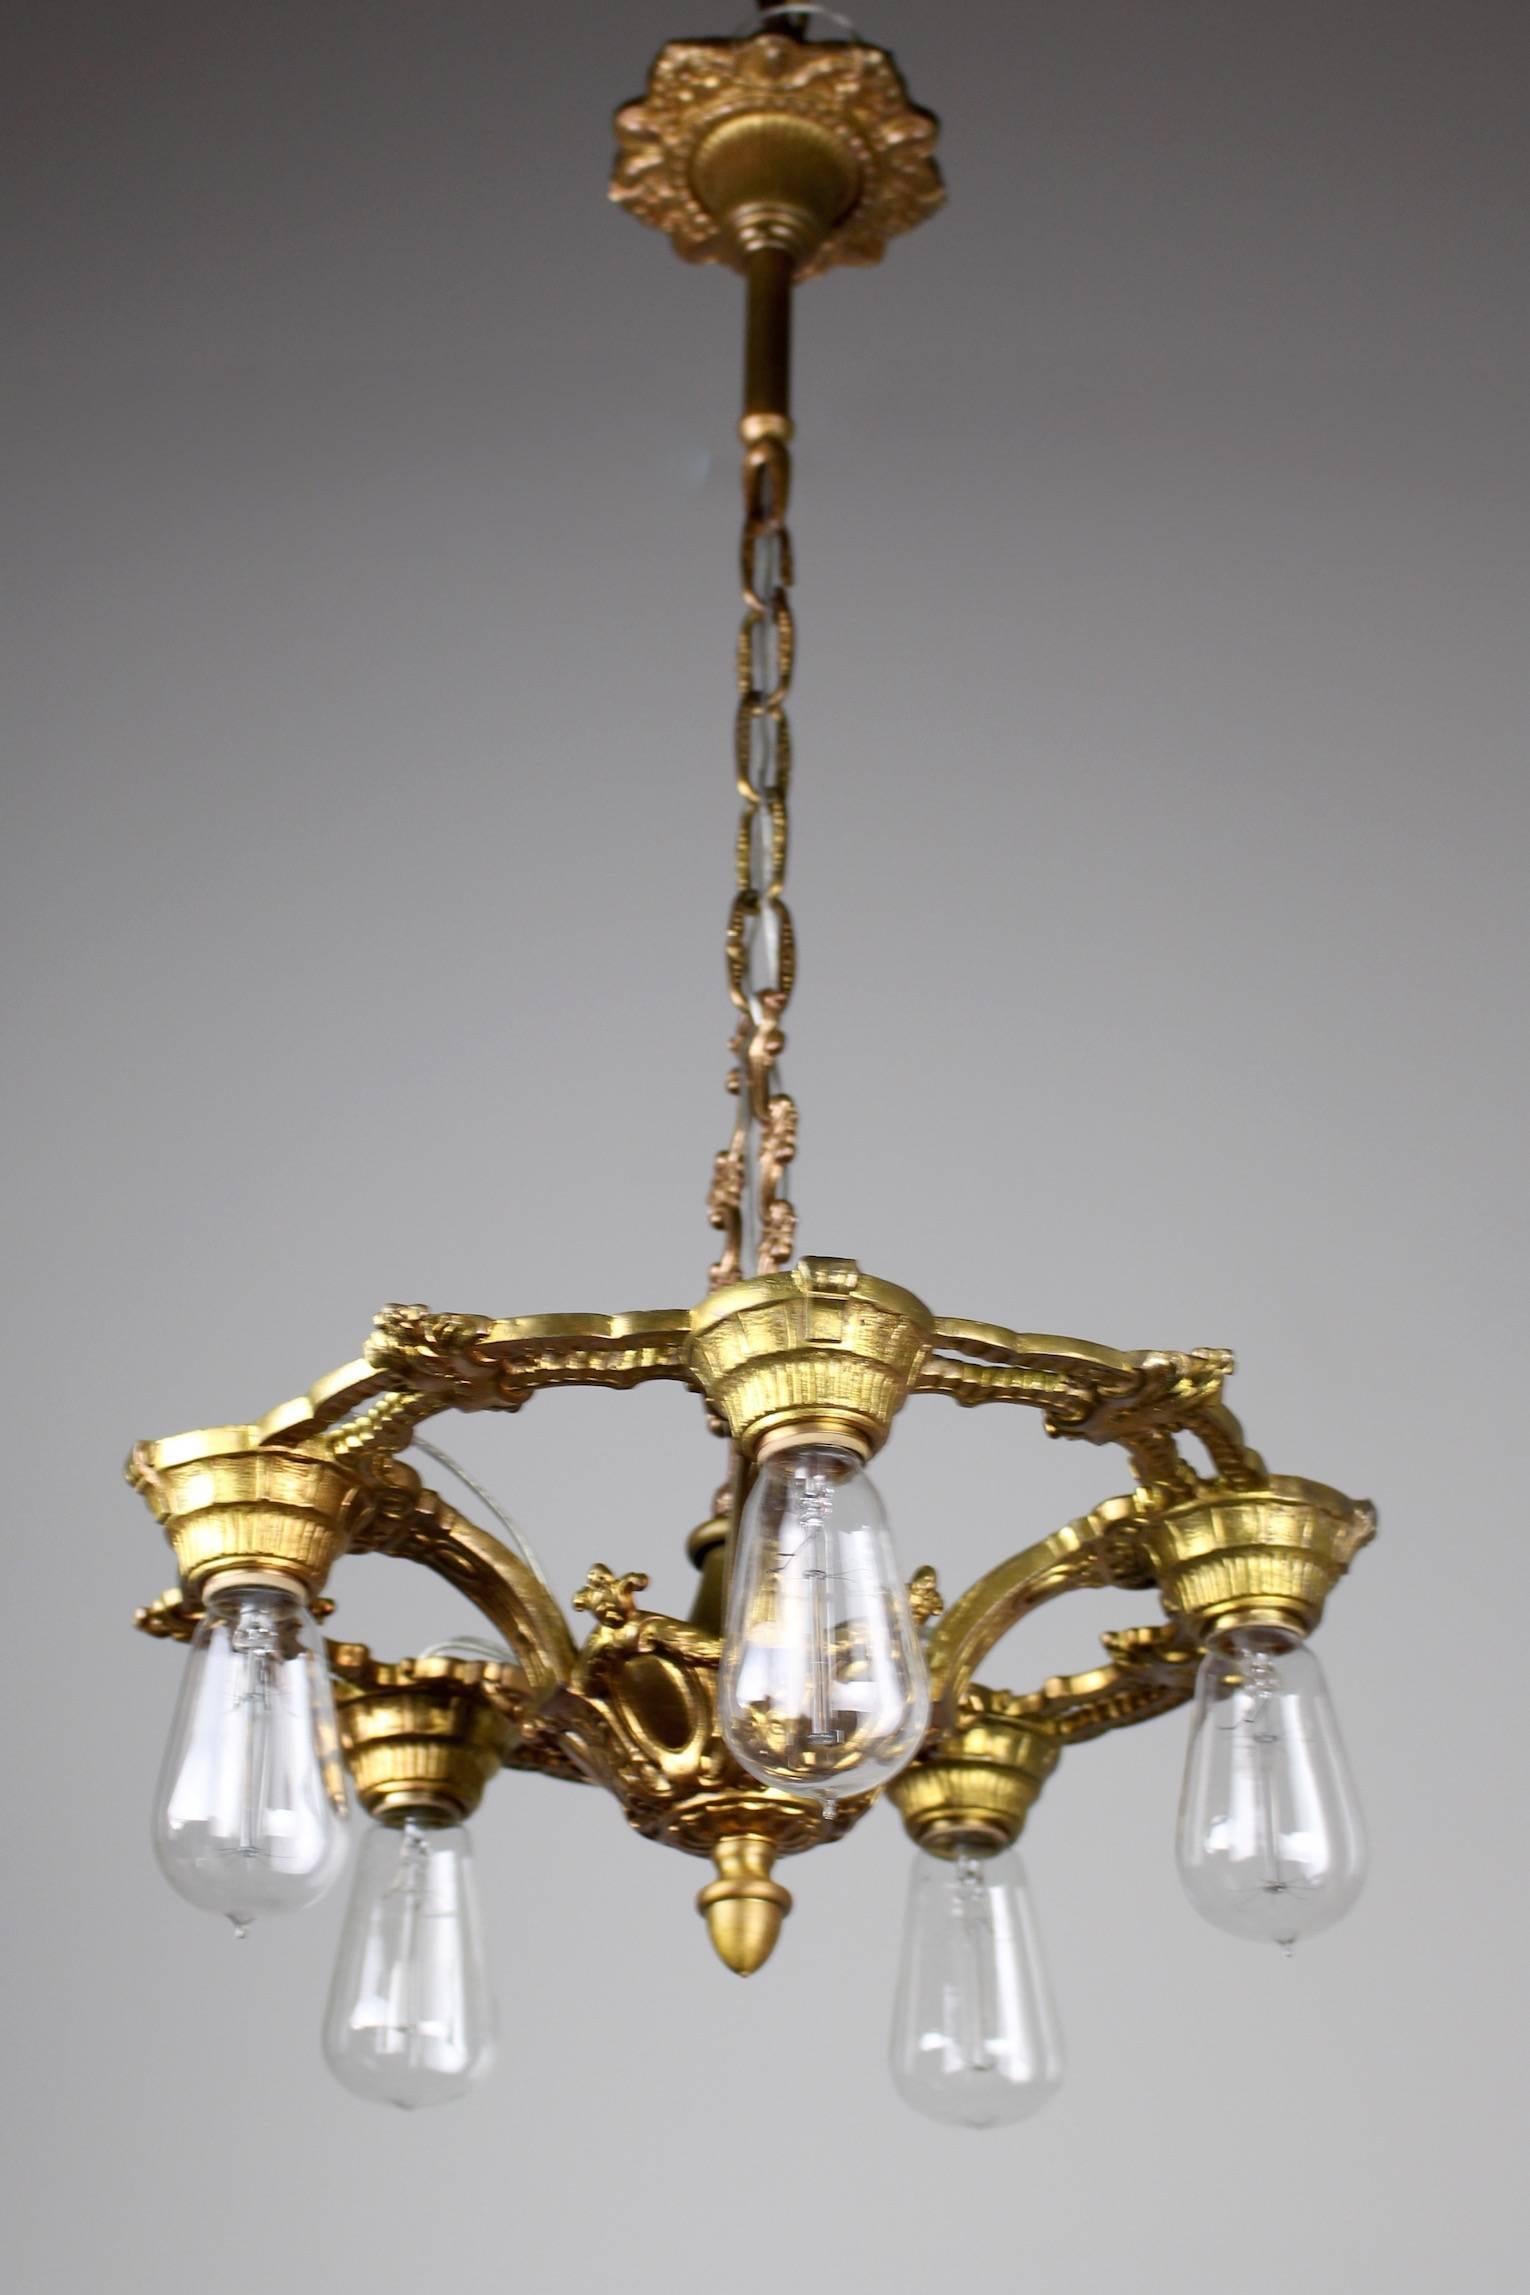 Neoclassical Revival 1920s Cast Brass Fixture in the Neoclassical Style